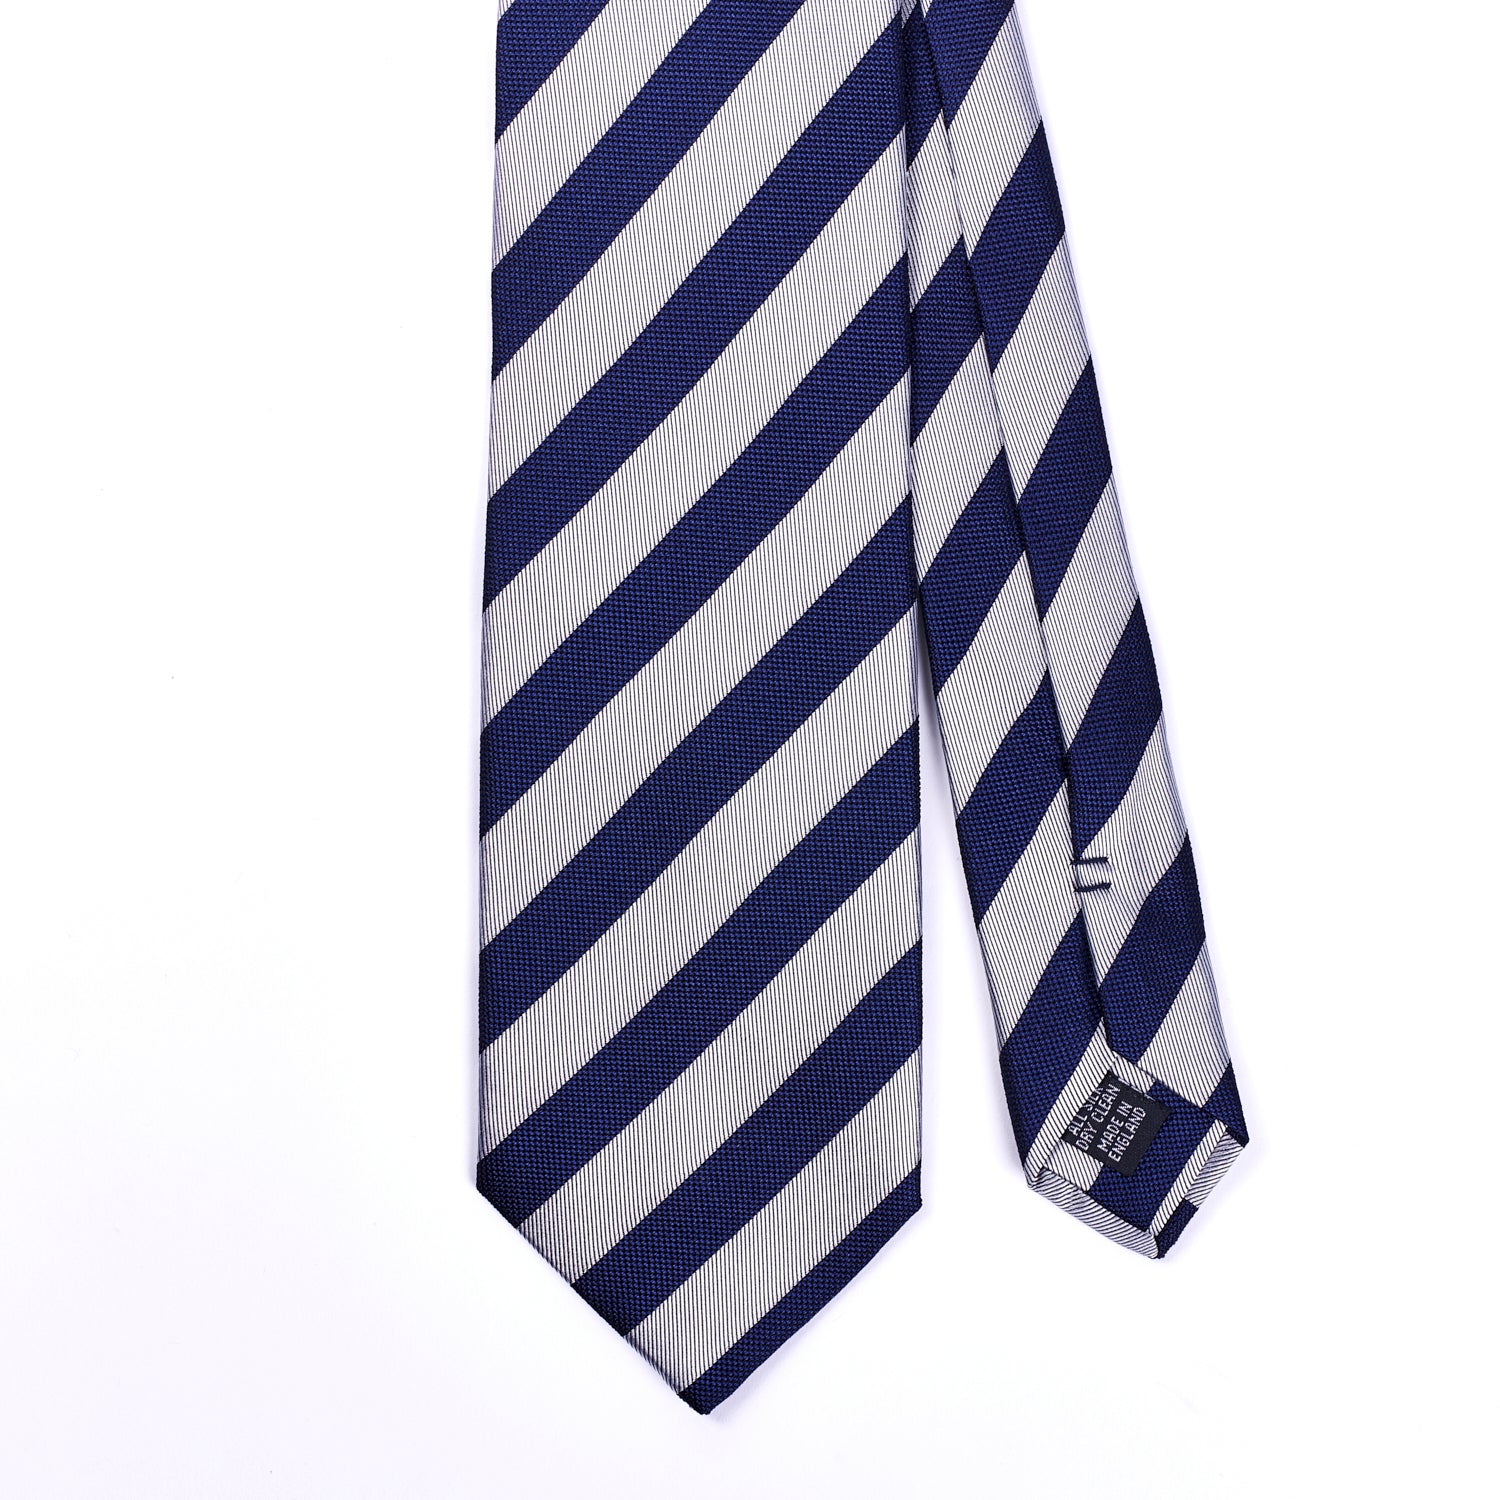 A Sovereign Grade Woven Navy and Silver Rep Tie, 150 cm from KirbyAllison.com on a white background.